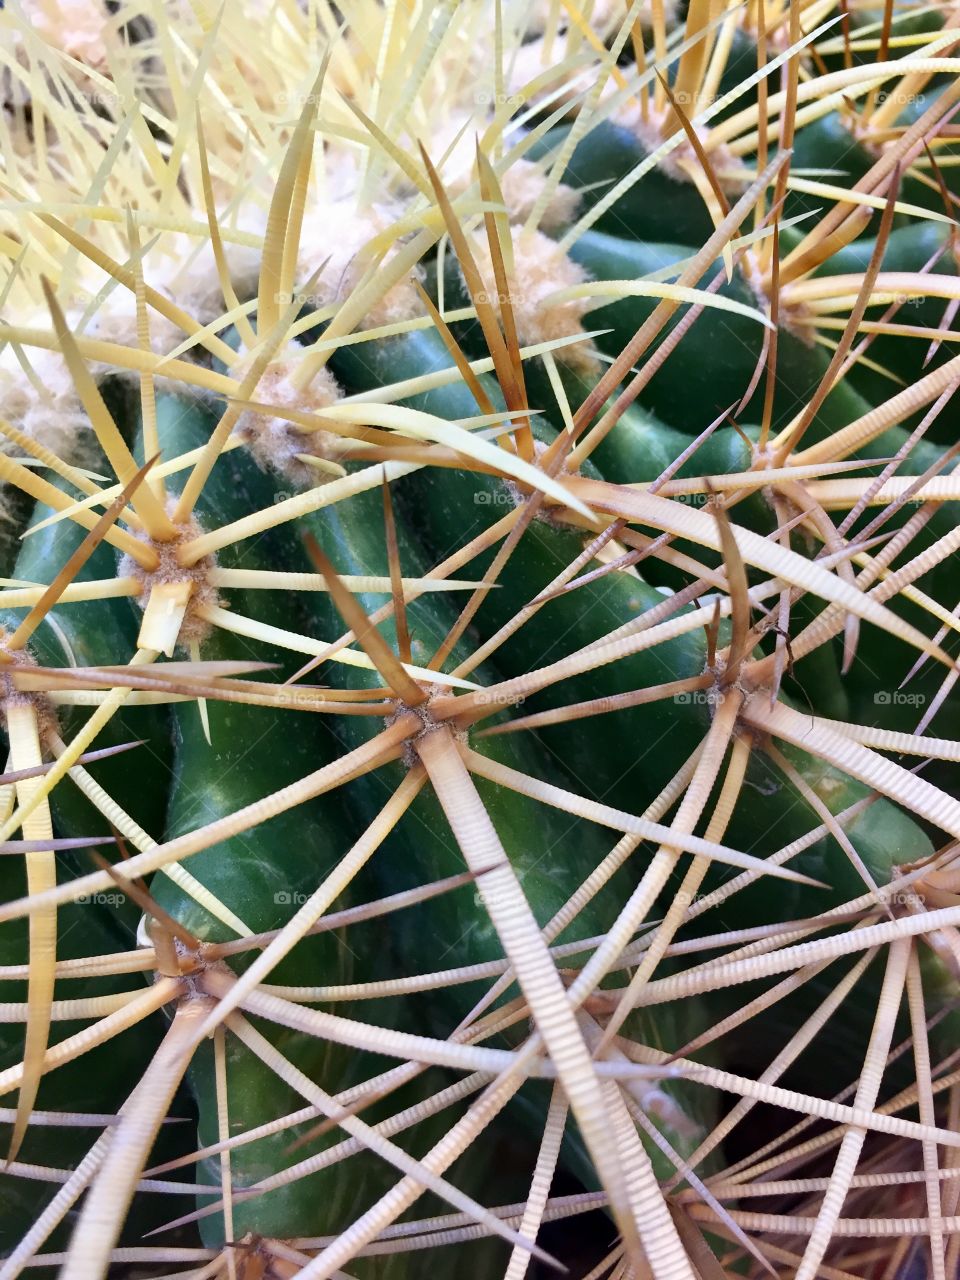 Many cactus thorns in a tight small area